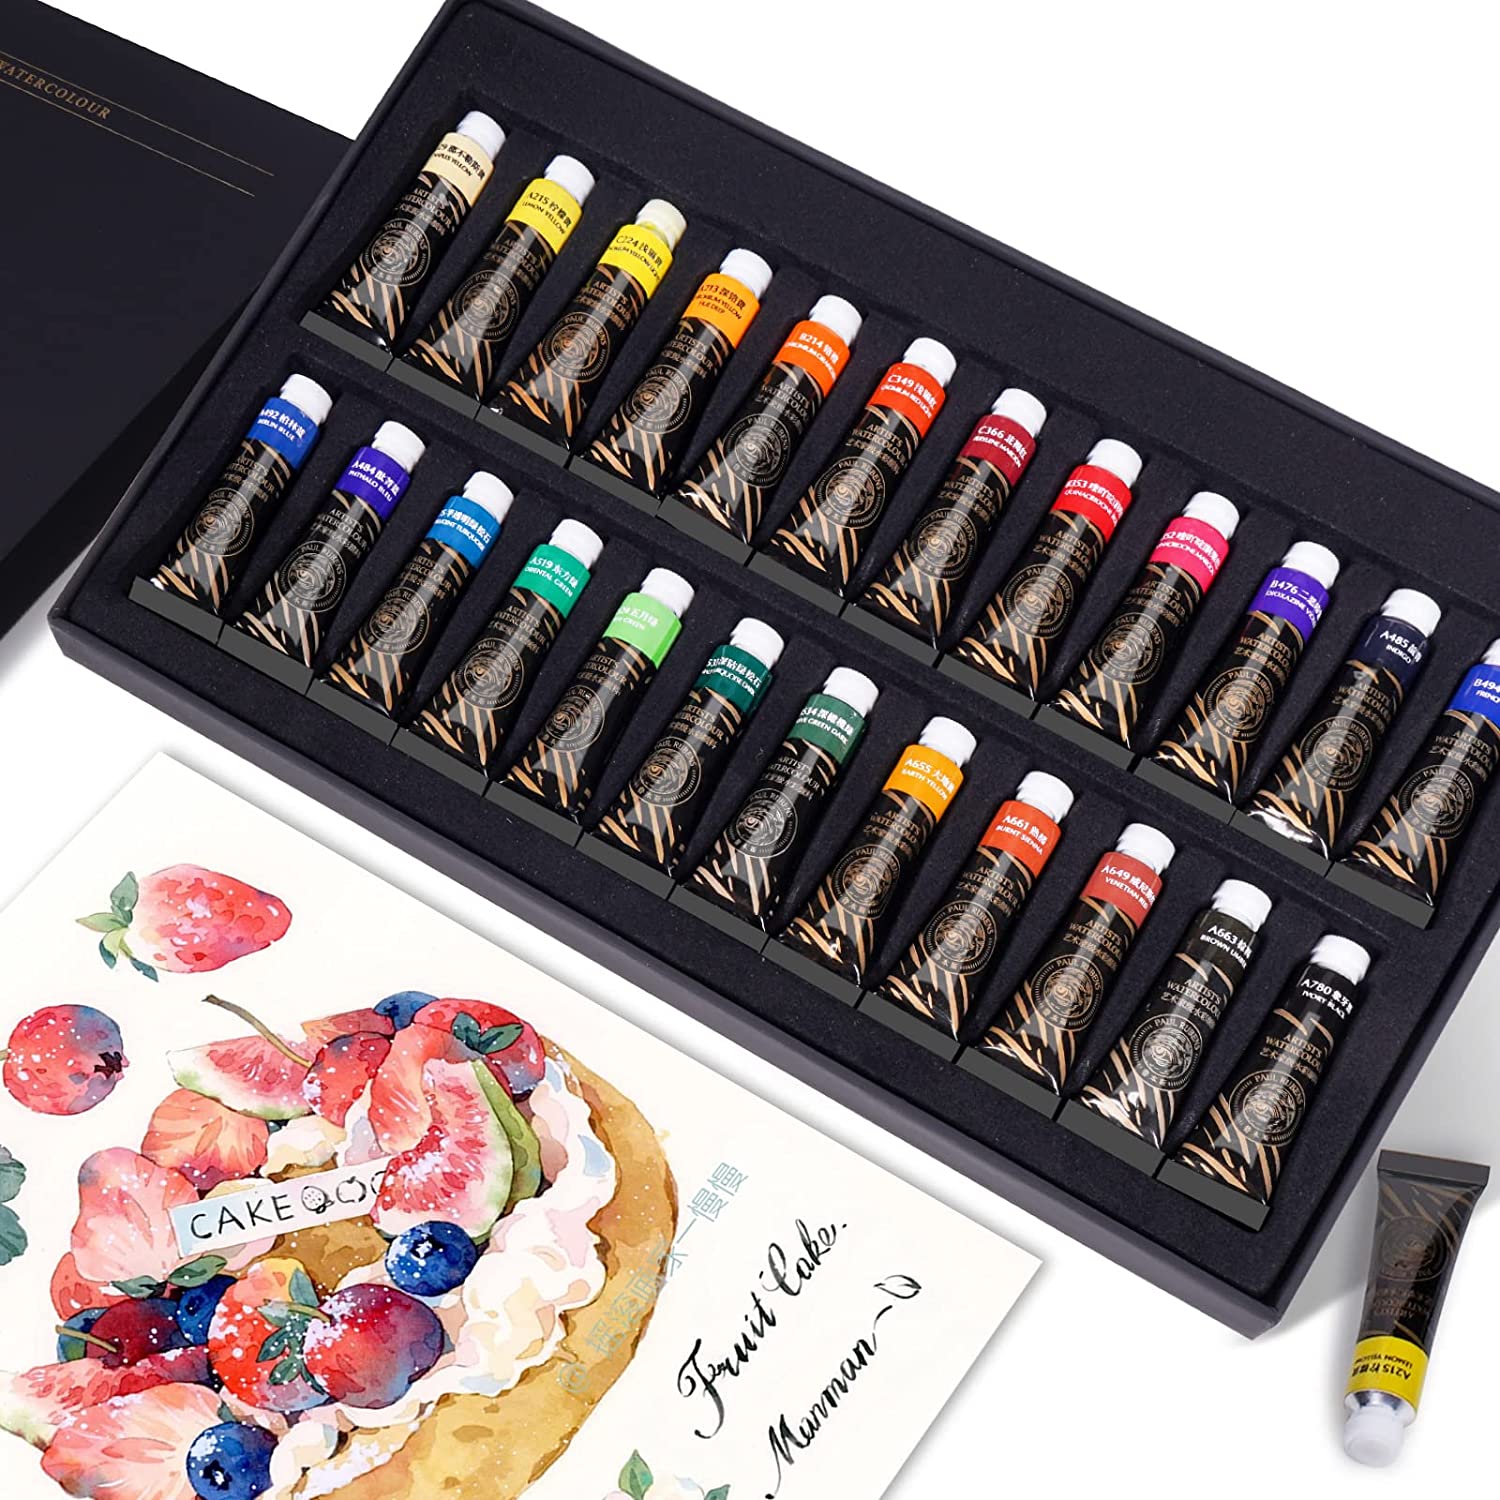 Paul Rubens 24 Colors Full Size Solid Watercolor Paint Set High